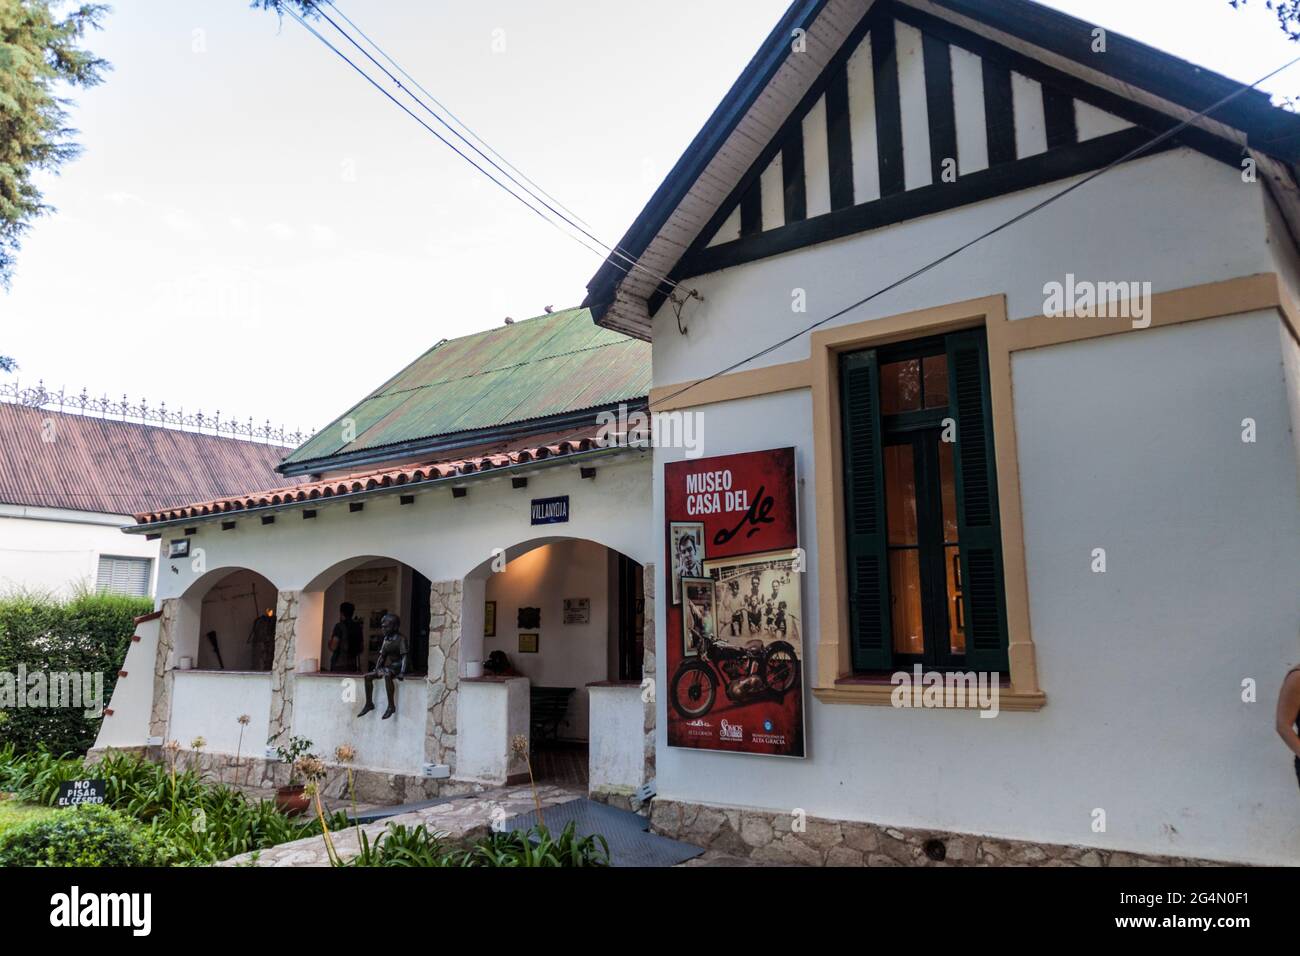 ALTA GRACIA, ARGENTINA - APRIL 3, 2015: Ernesto Che Guevara museum in Alta Gracia town, Argentina. Che Guevara lived in this house as a teenager. Stock Photo